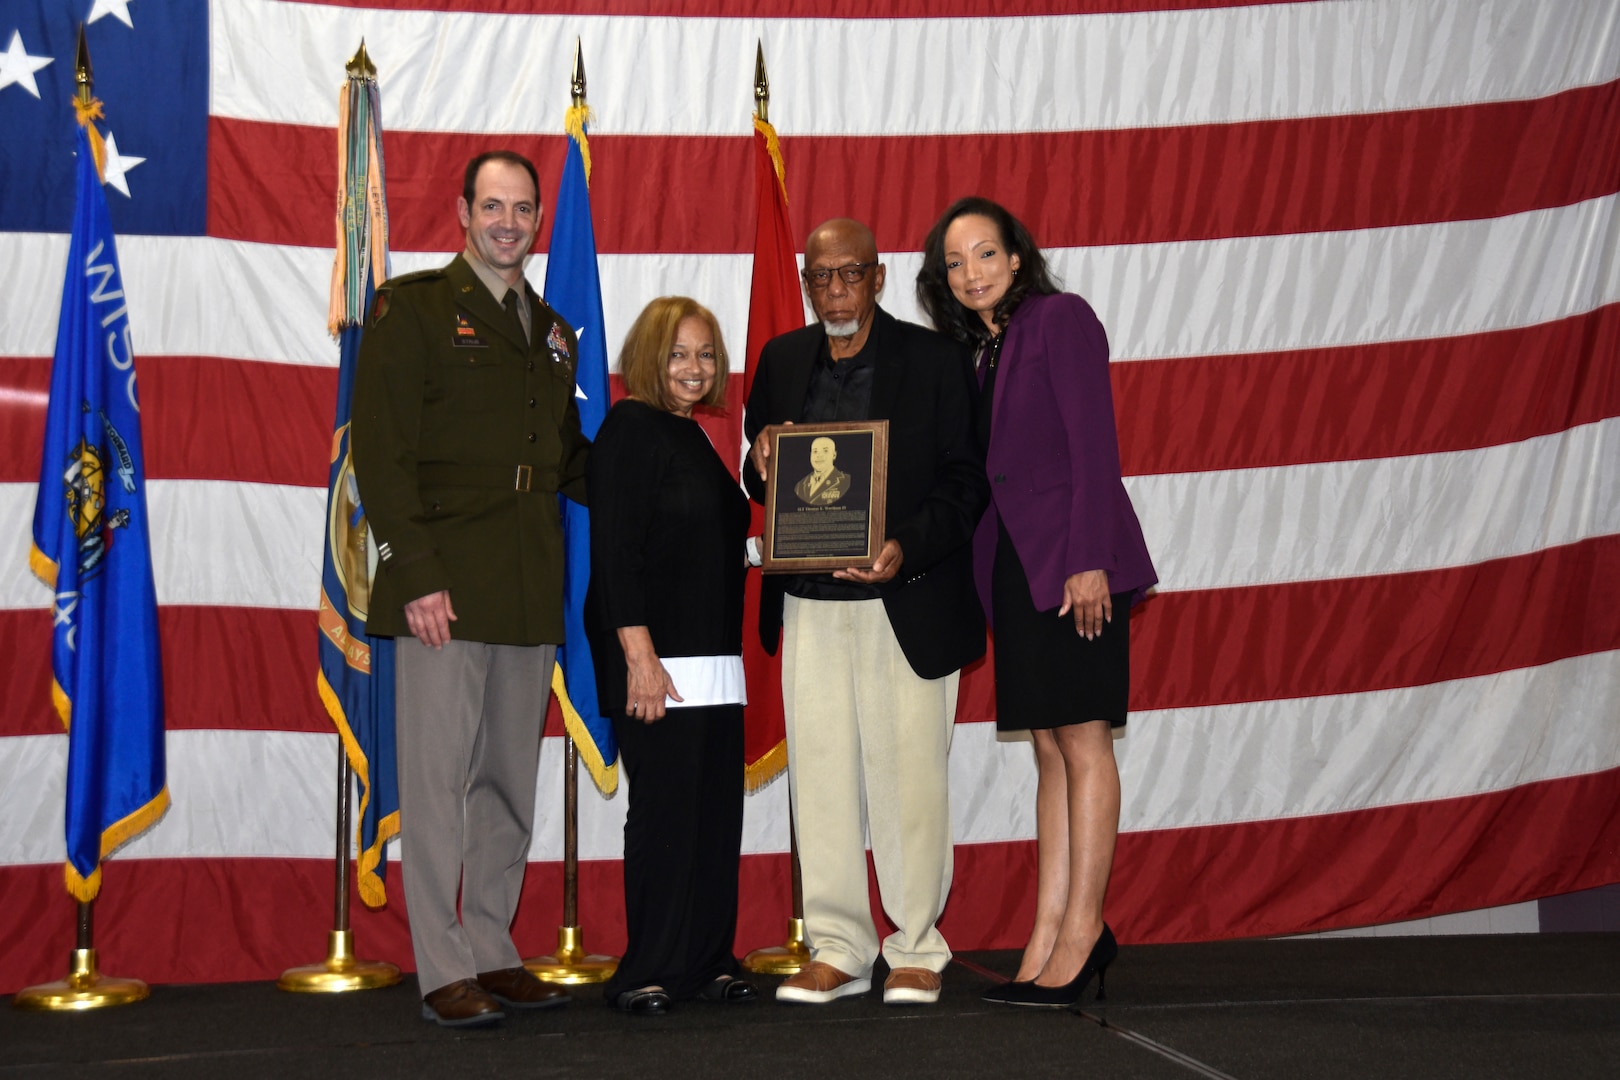 Brig. Gen. Matthew Strub, Wisconsin’s deputy adjutant general for Army, presents the family of 1st Lt. Thomas E. Wortham IV with a plaque during a Wisconsin Army National Guard Hall of Honor induction ceremony Oct. 27 at Joint Force Headquarters in Madison, Wis.